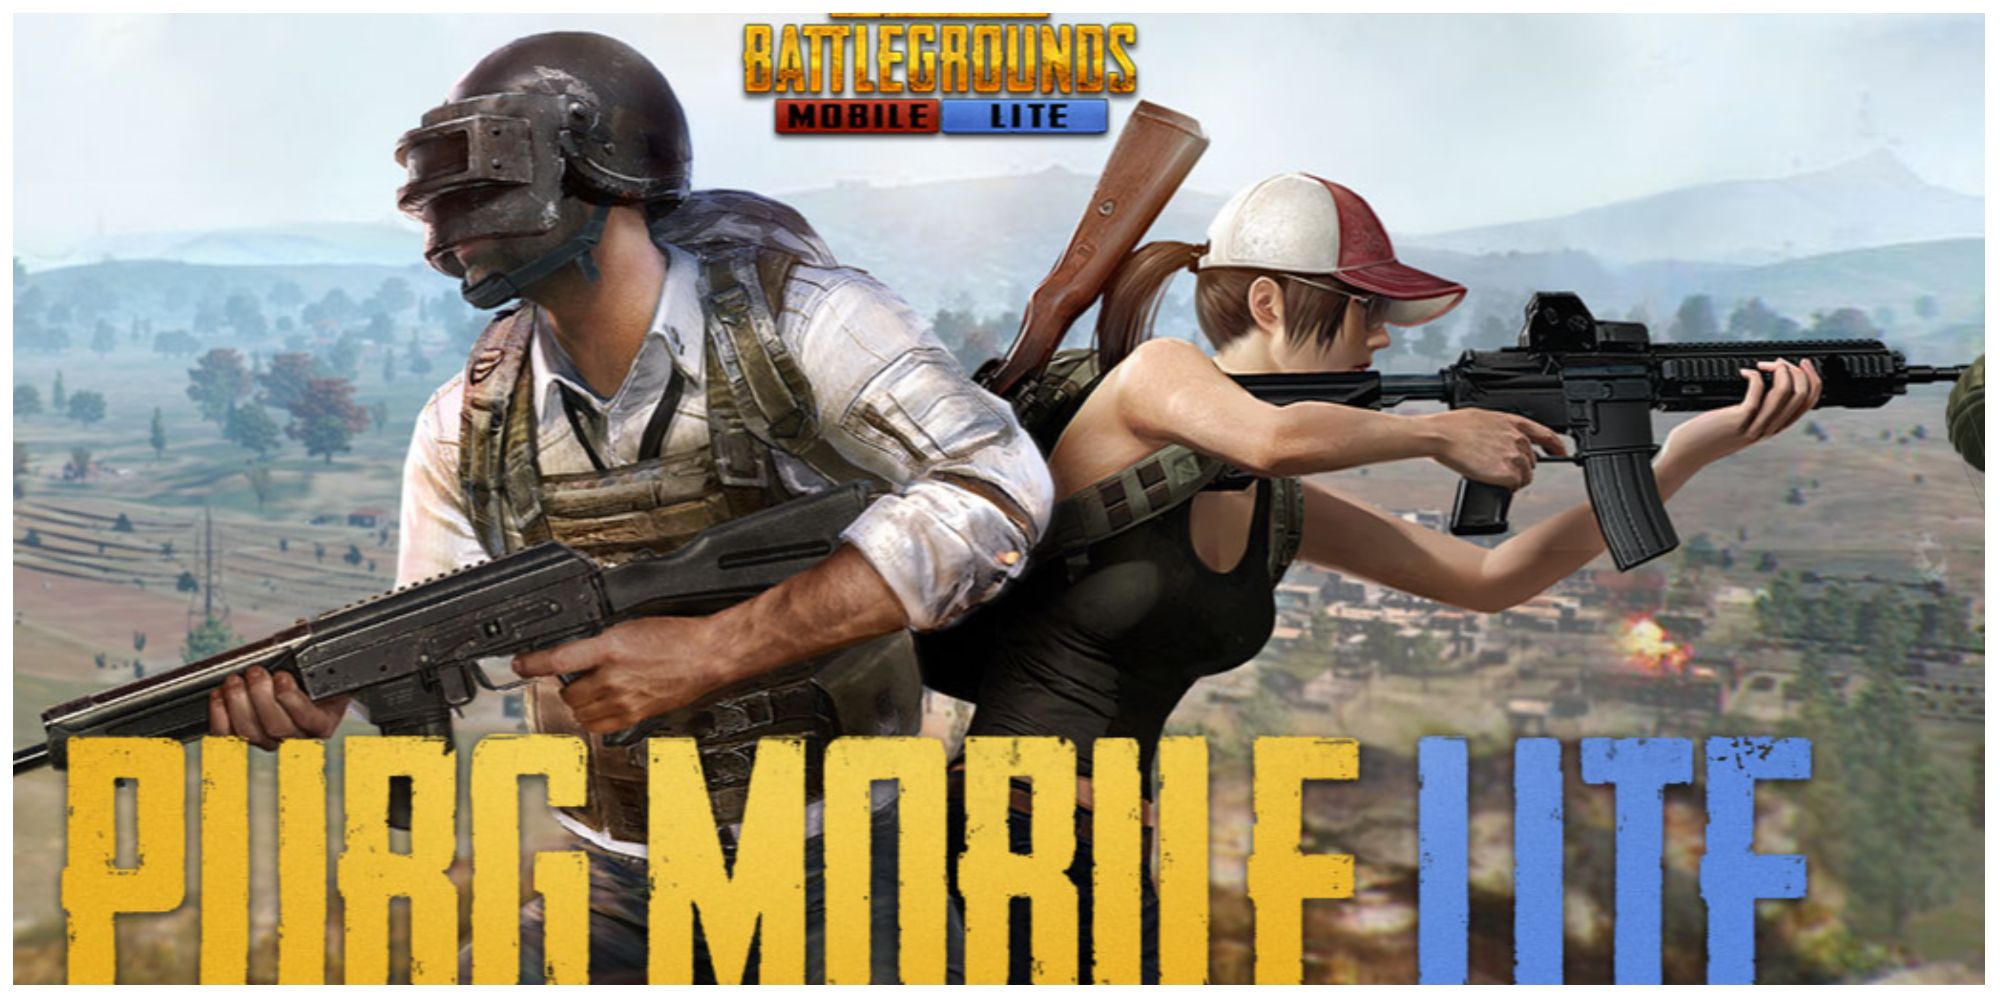 A shooting in PUBG Mobile Lite